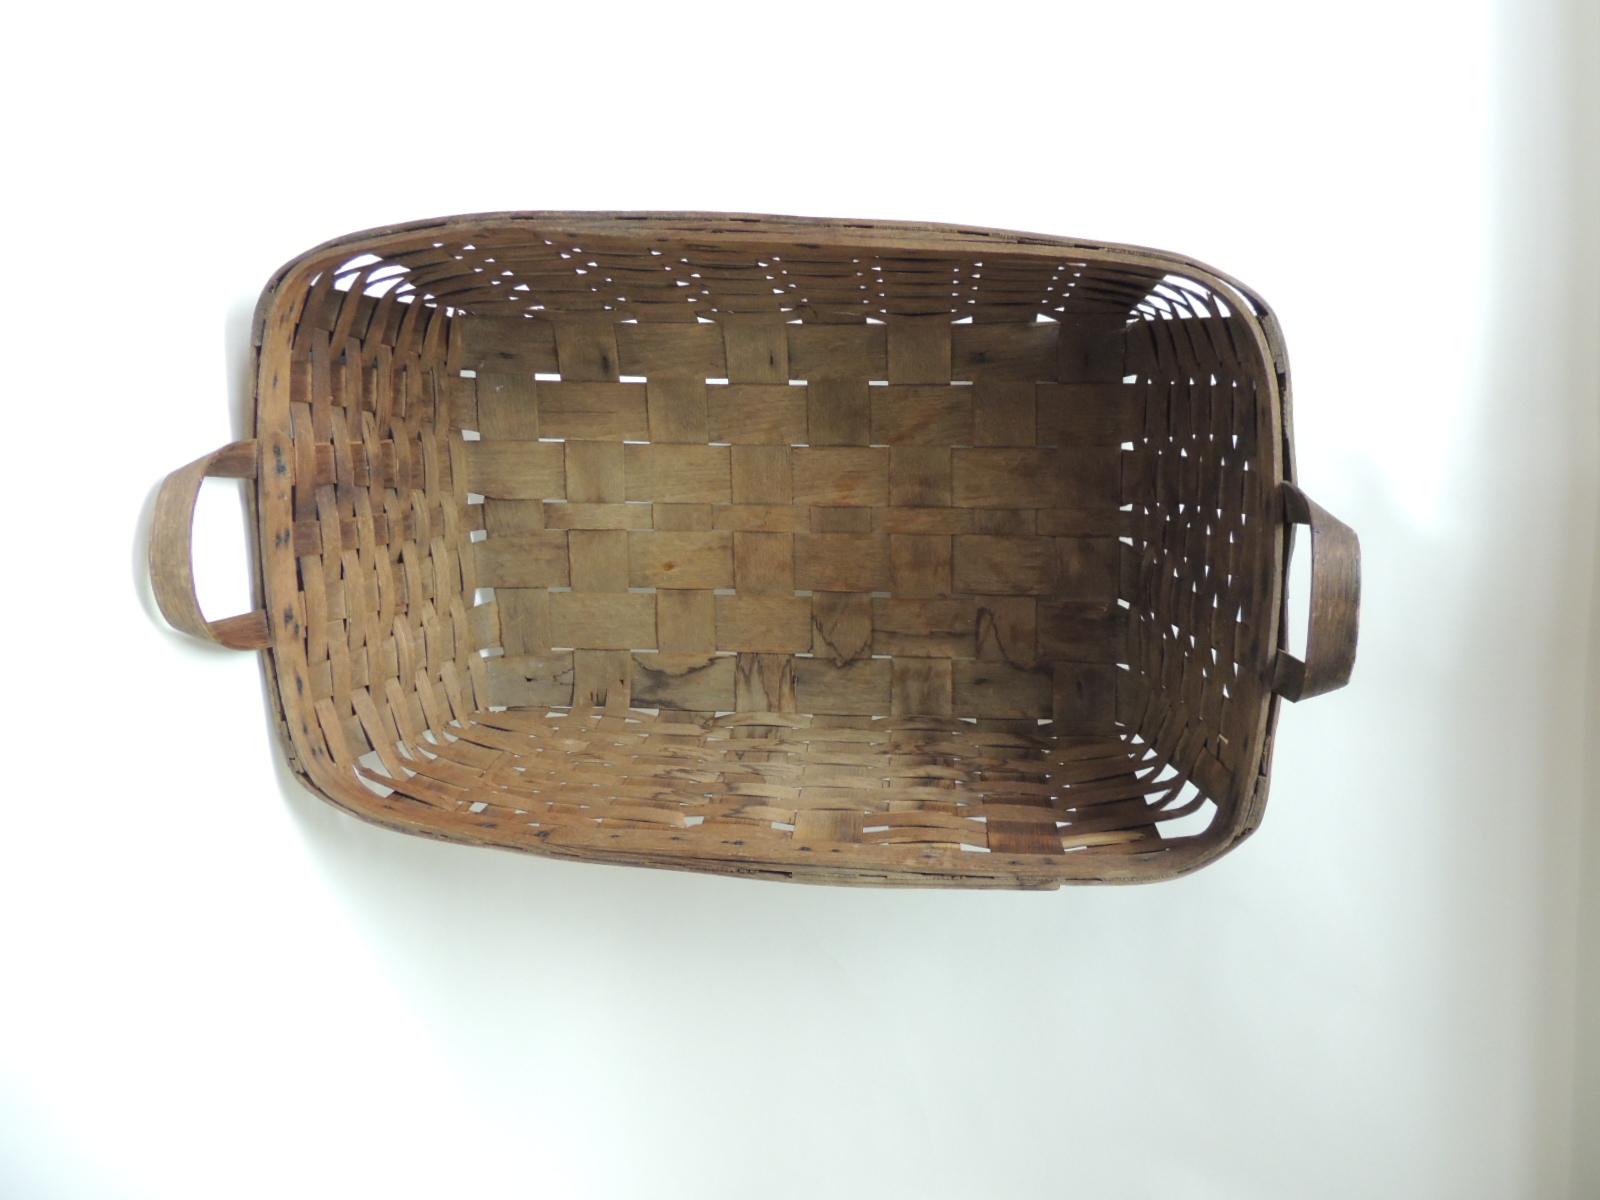 Shaker Antique Large Over-Size Wooden Flat-Woven Harvest Basket with Handles